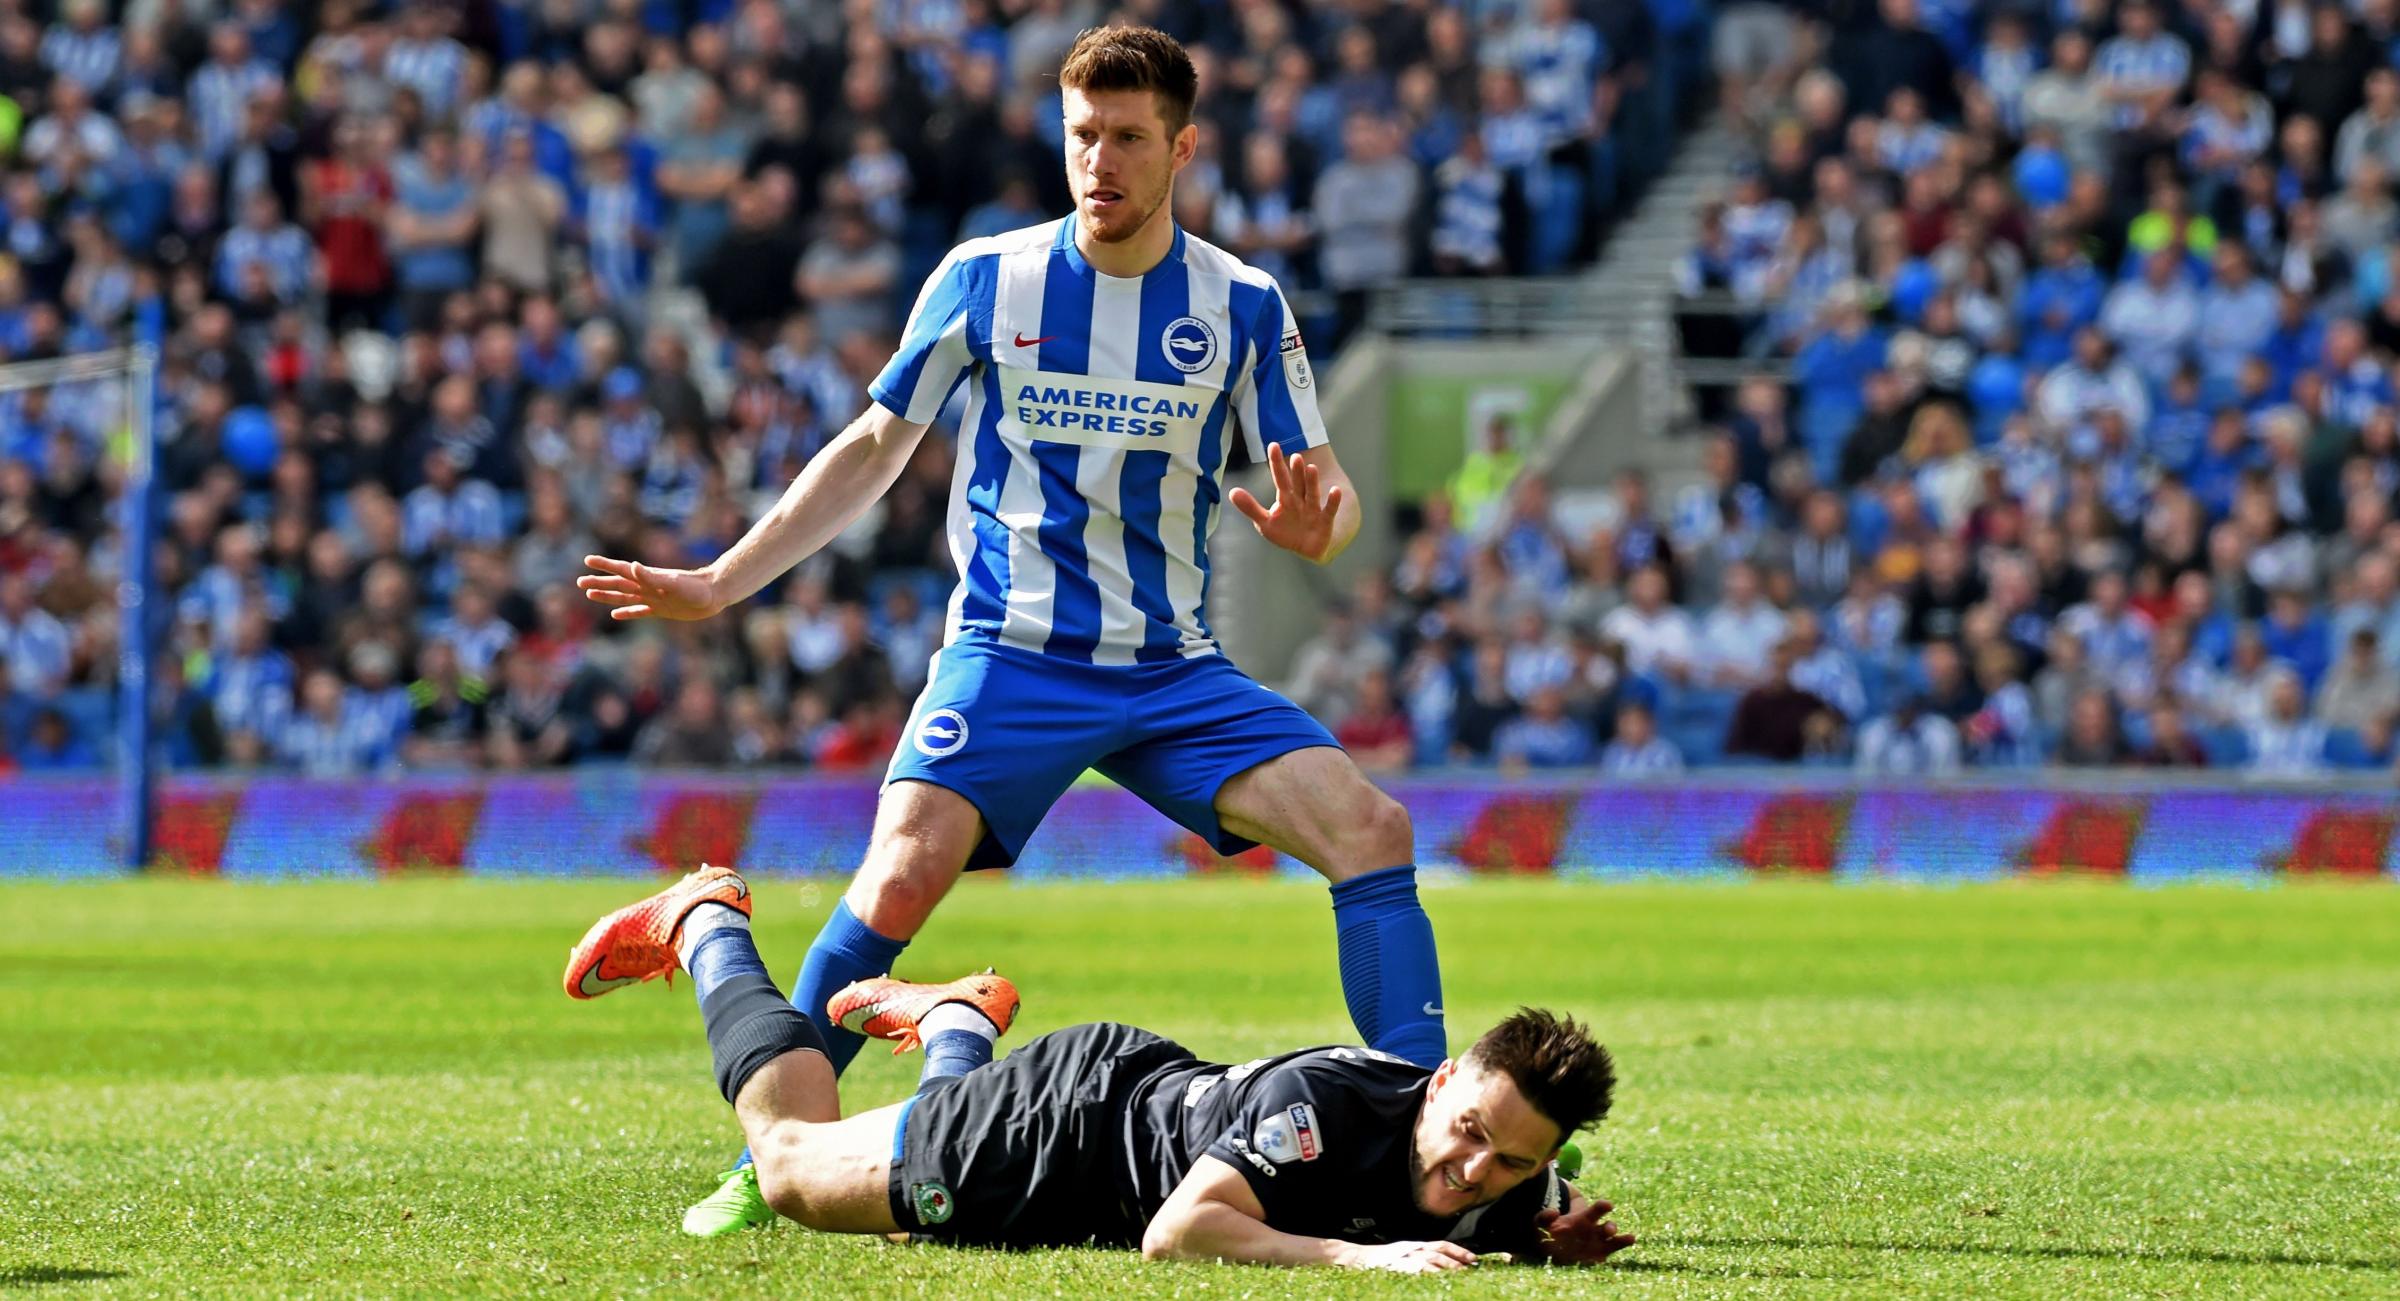 Sebastien Pocognoli not expected back at Brighton and Hove Albion ... - The Argus